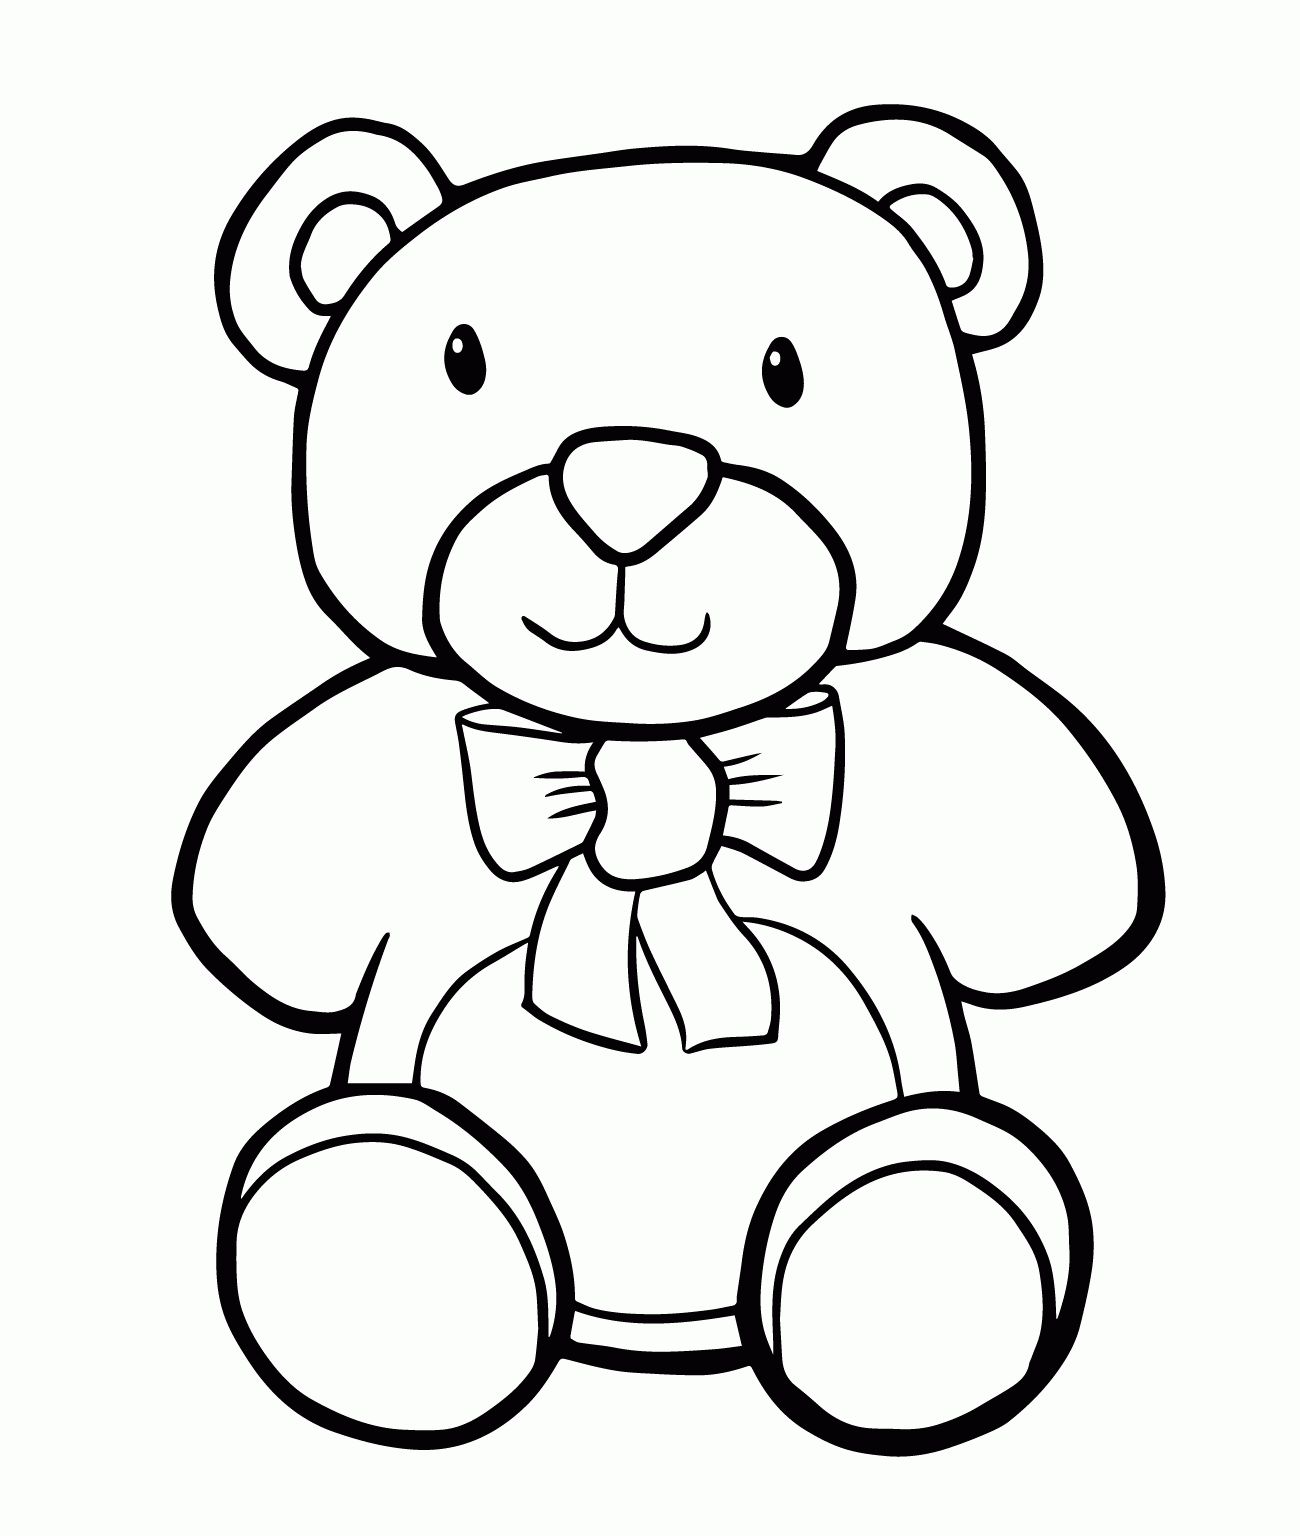 Free Printable Teddy Bear Coloring Pages For Kids - Coloring Home - Teddy Bear Coloring Pages Free Printable